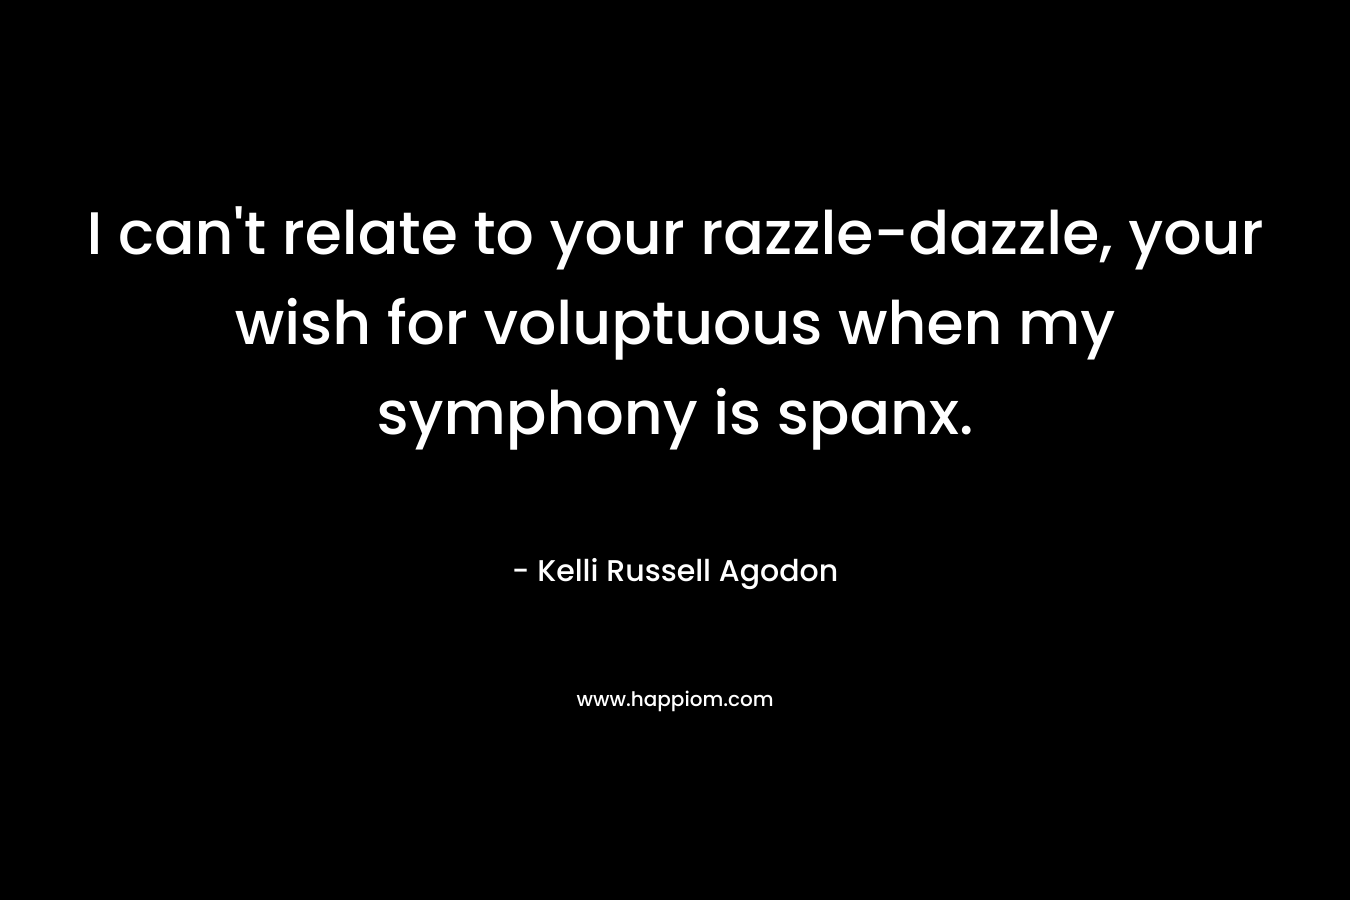 I can’t relate to your razzle-dazzle, your wish for voluptuous when my symphony is spanx. – Kelli Russell Agodon